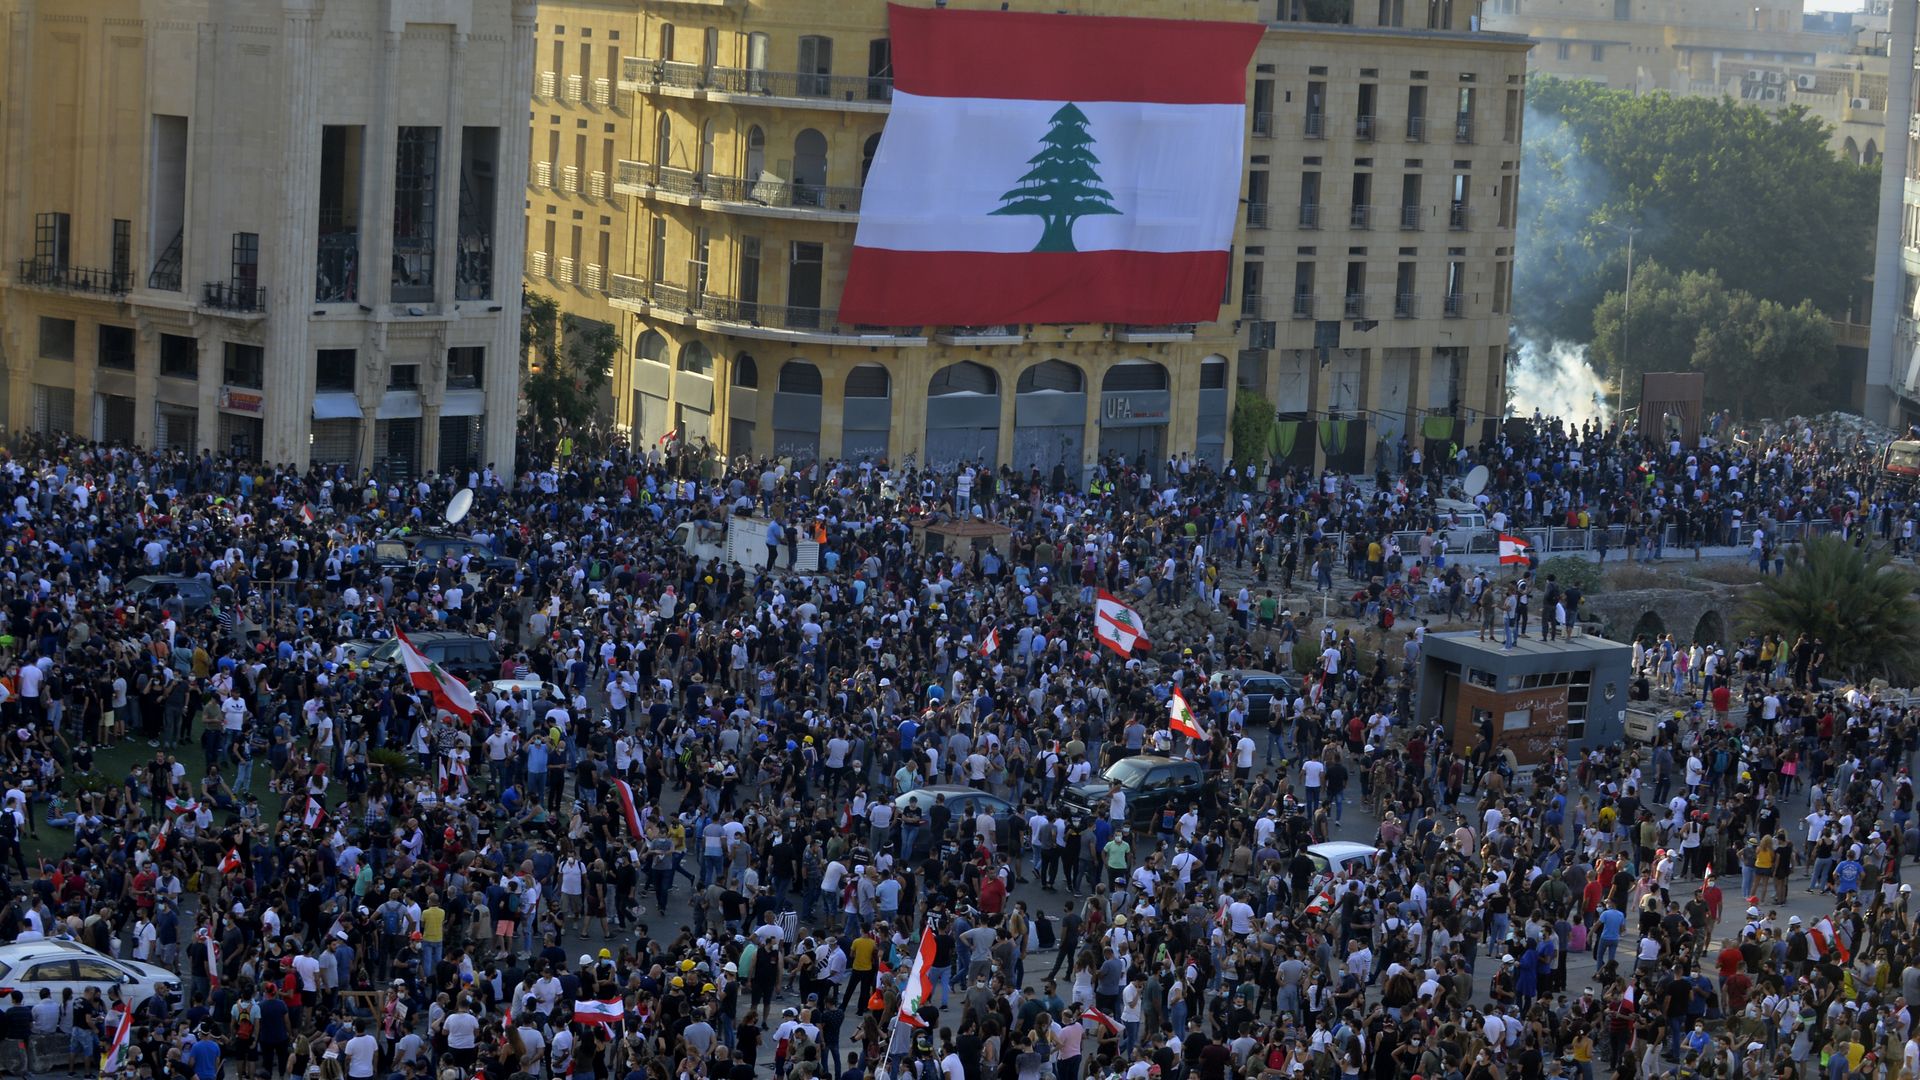  Demonstrators gather for a protest against government at the Martyrs' Square after the deadly explosion at the Port of Beirut led to massive blasts on 4th August in Beirut, Lebanon on August 08